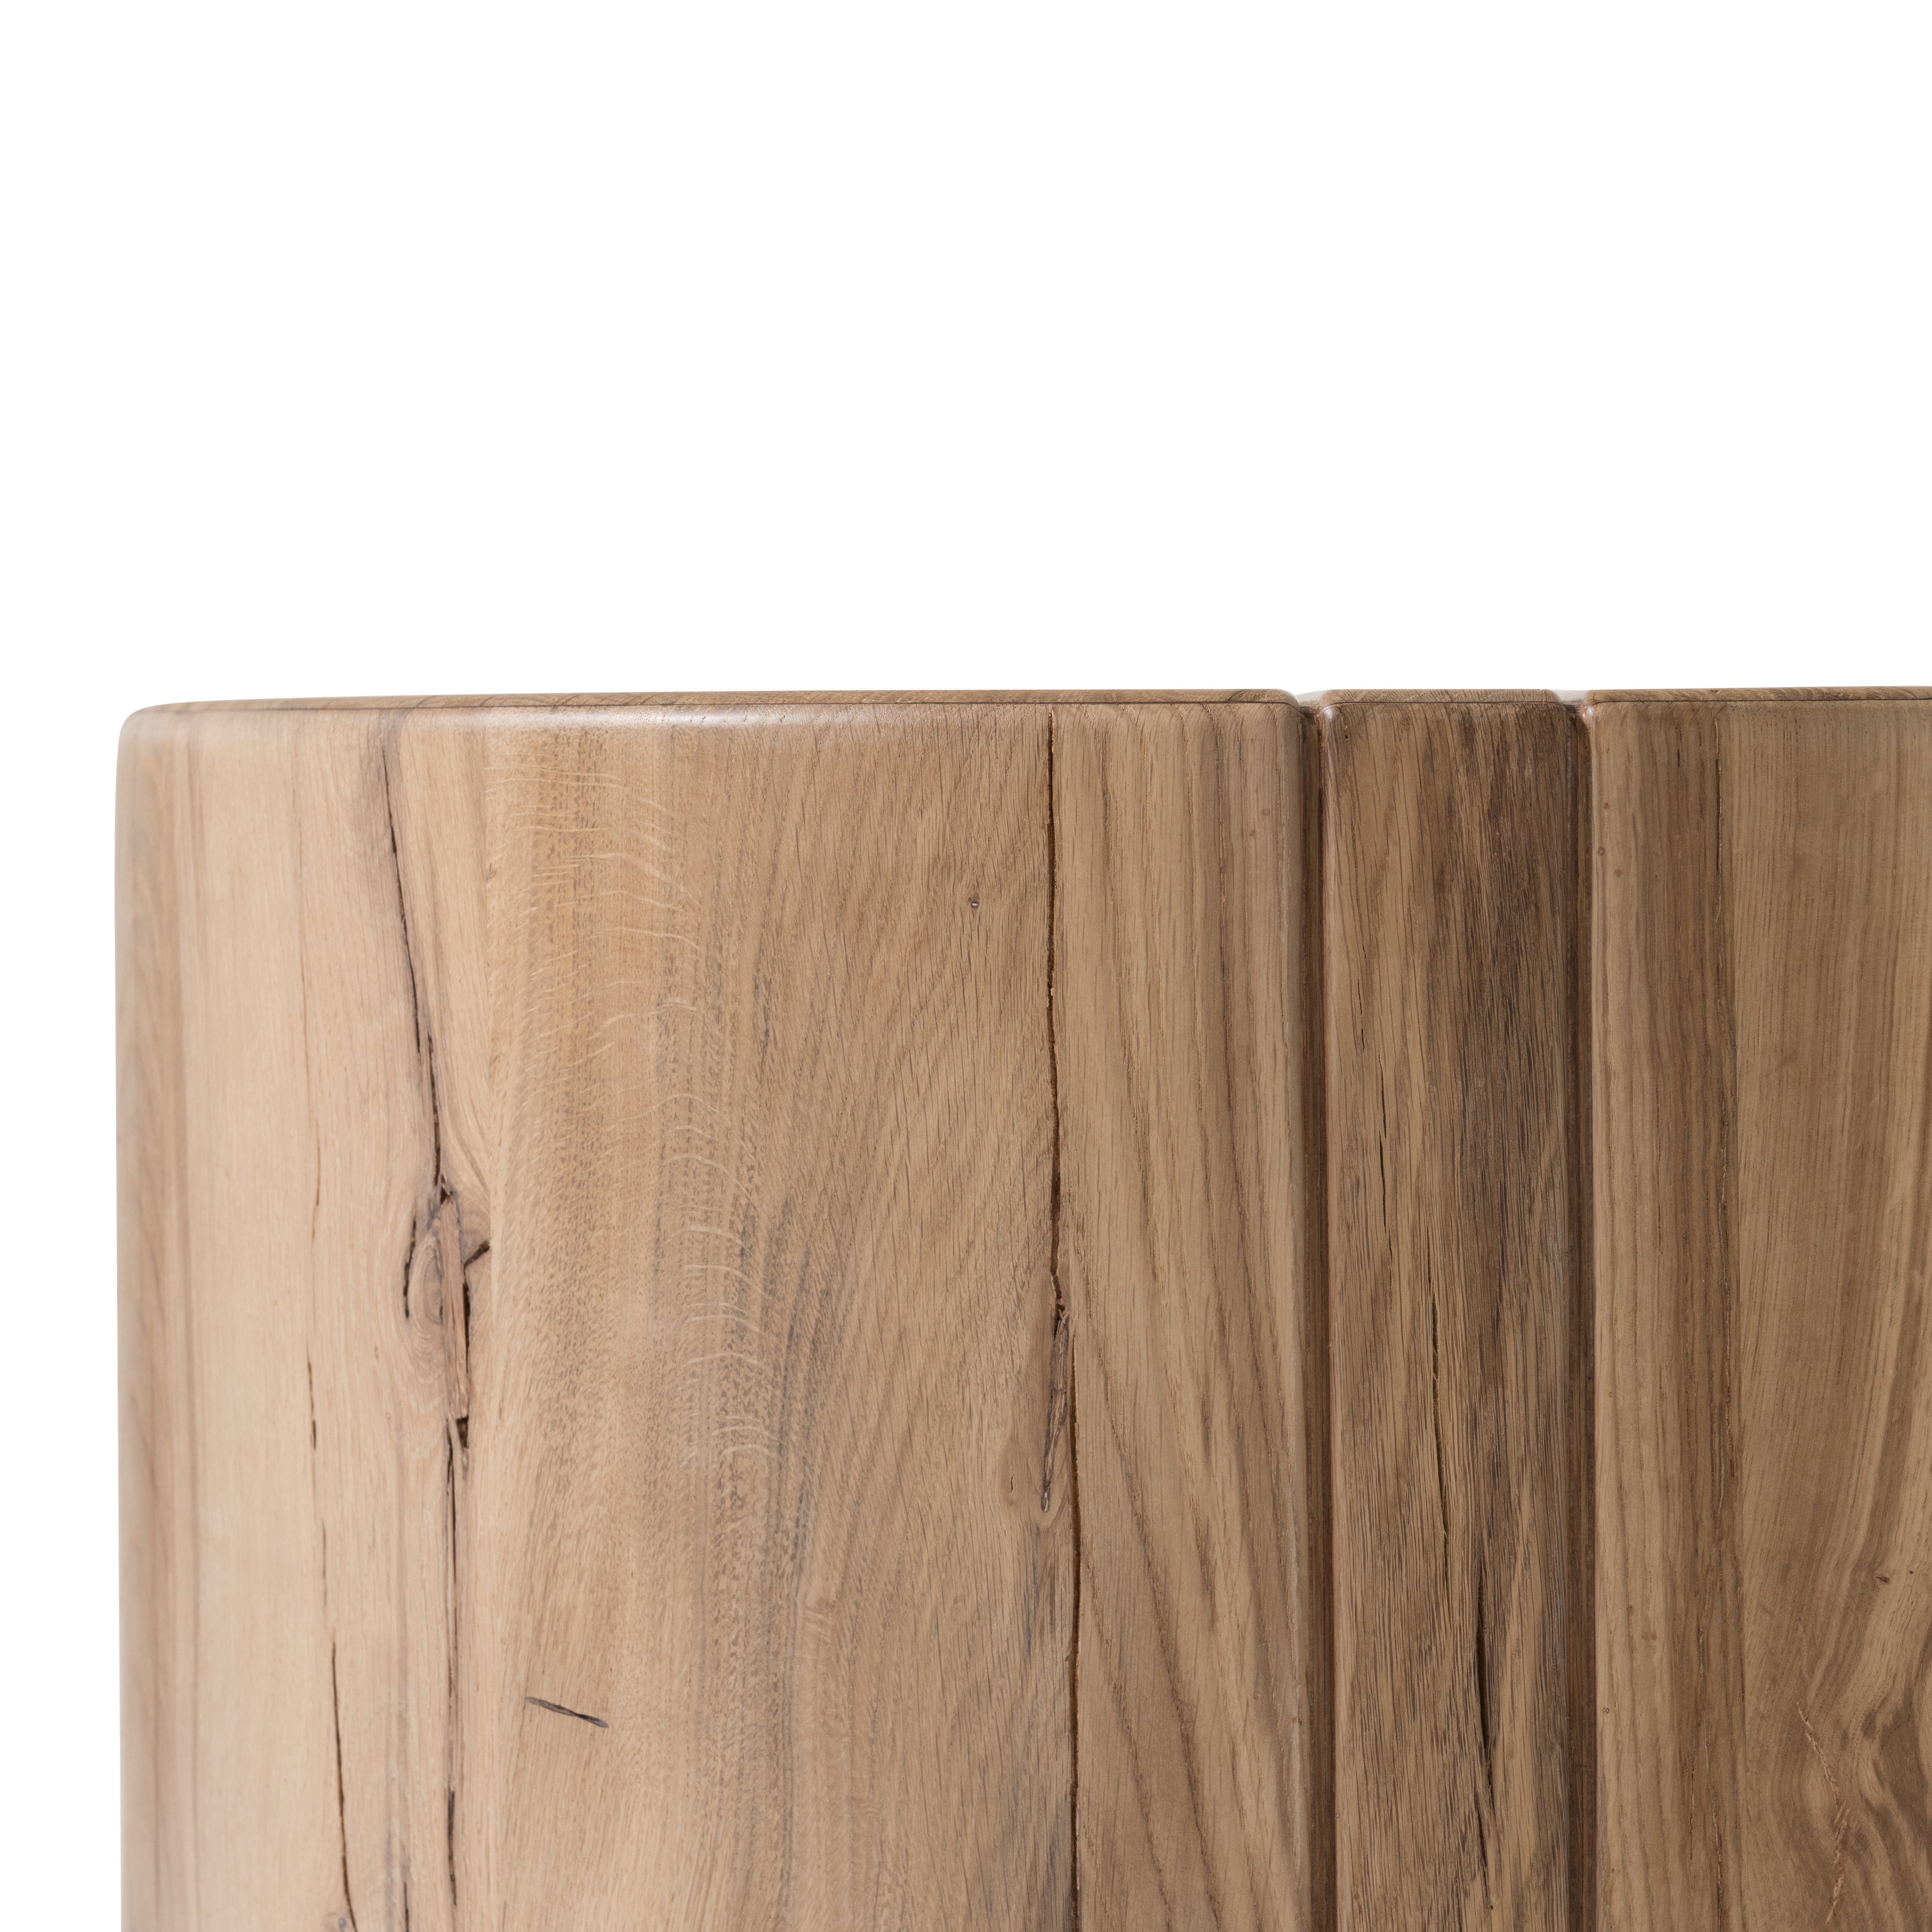 Renan End Table-Natural Reclaimed French - Image 2